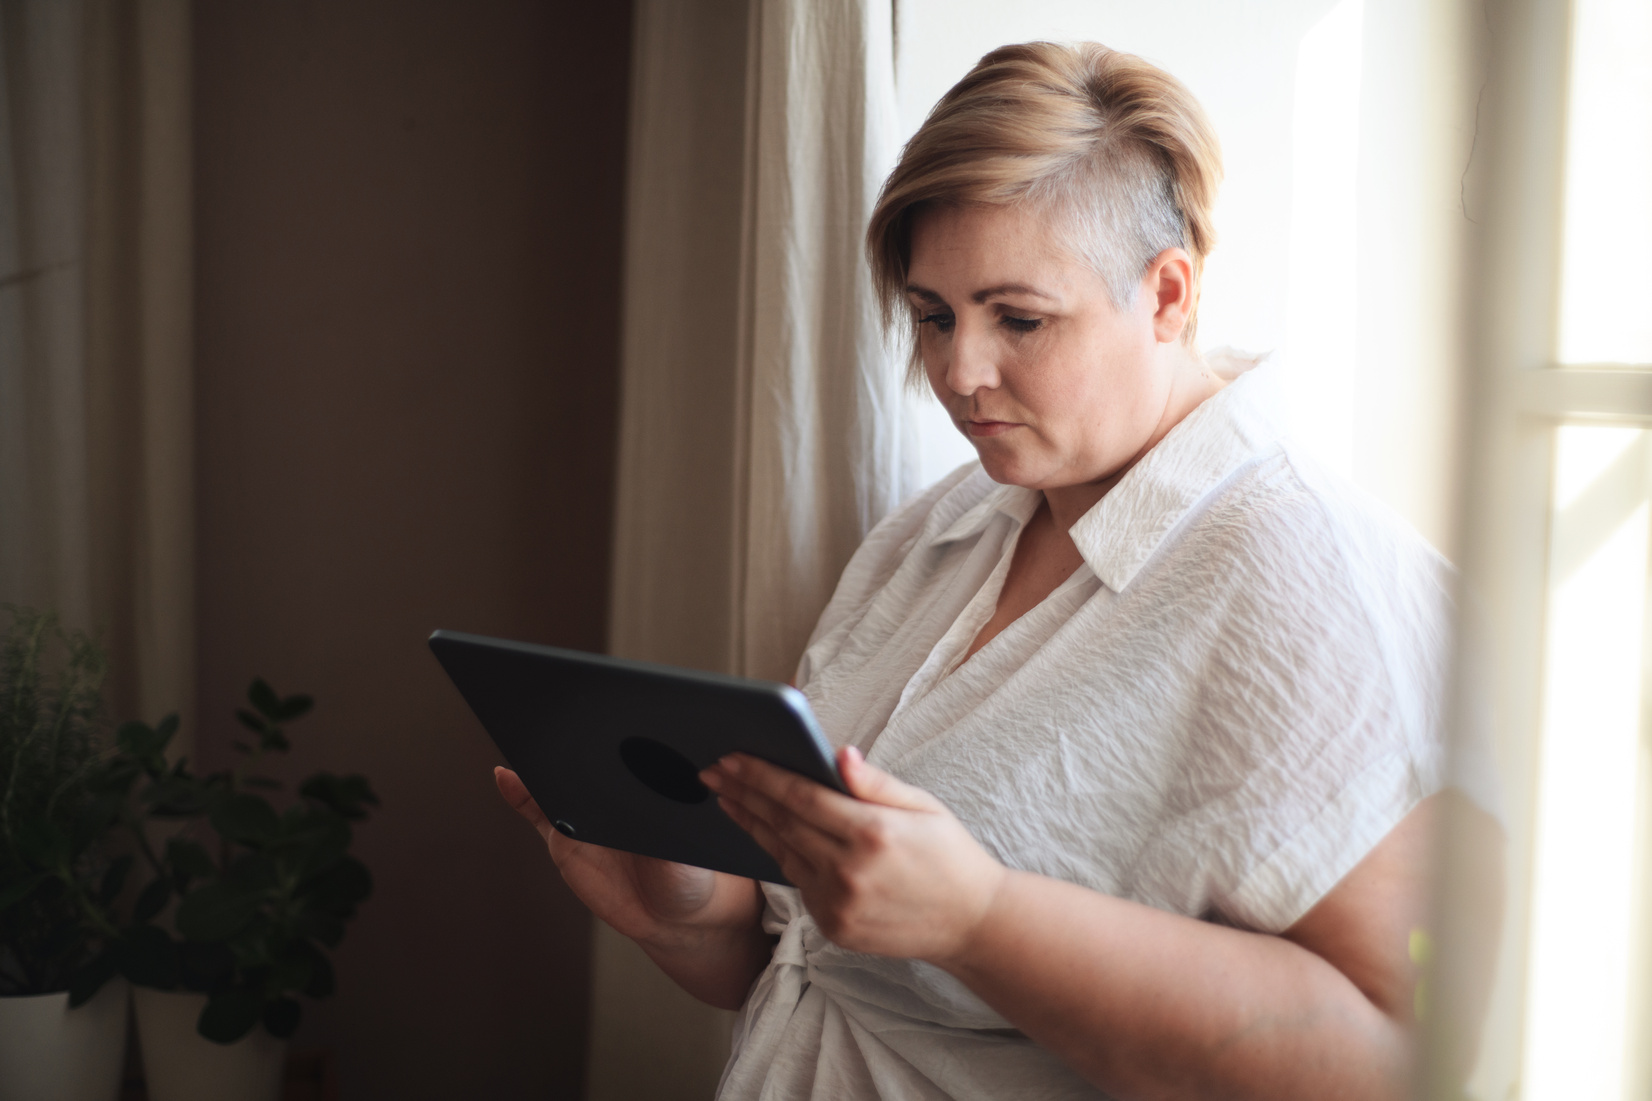 Woman in White Shirt Standing by Window and Using Tablet.